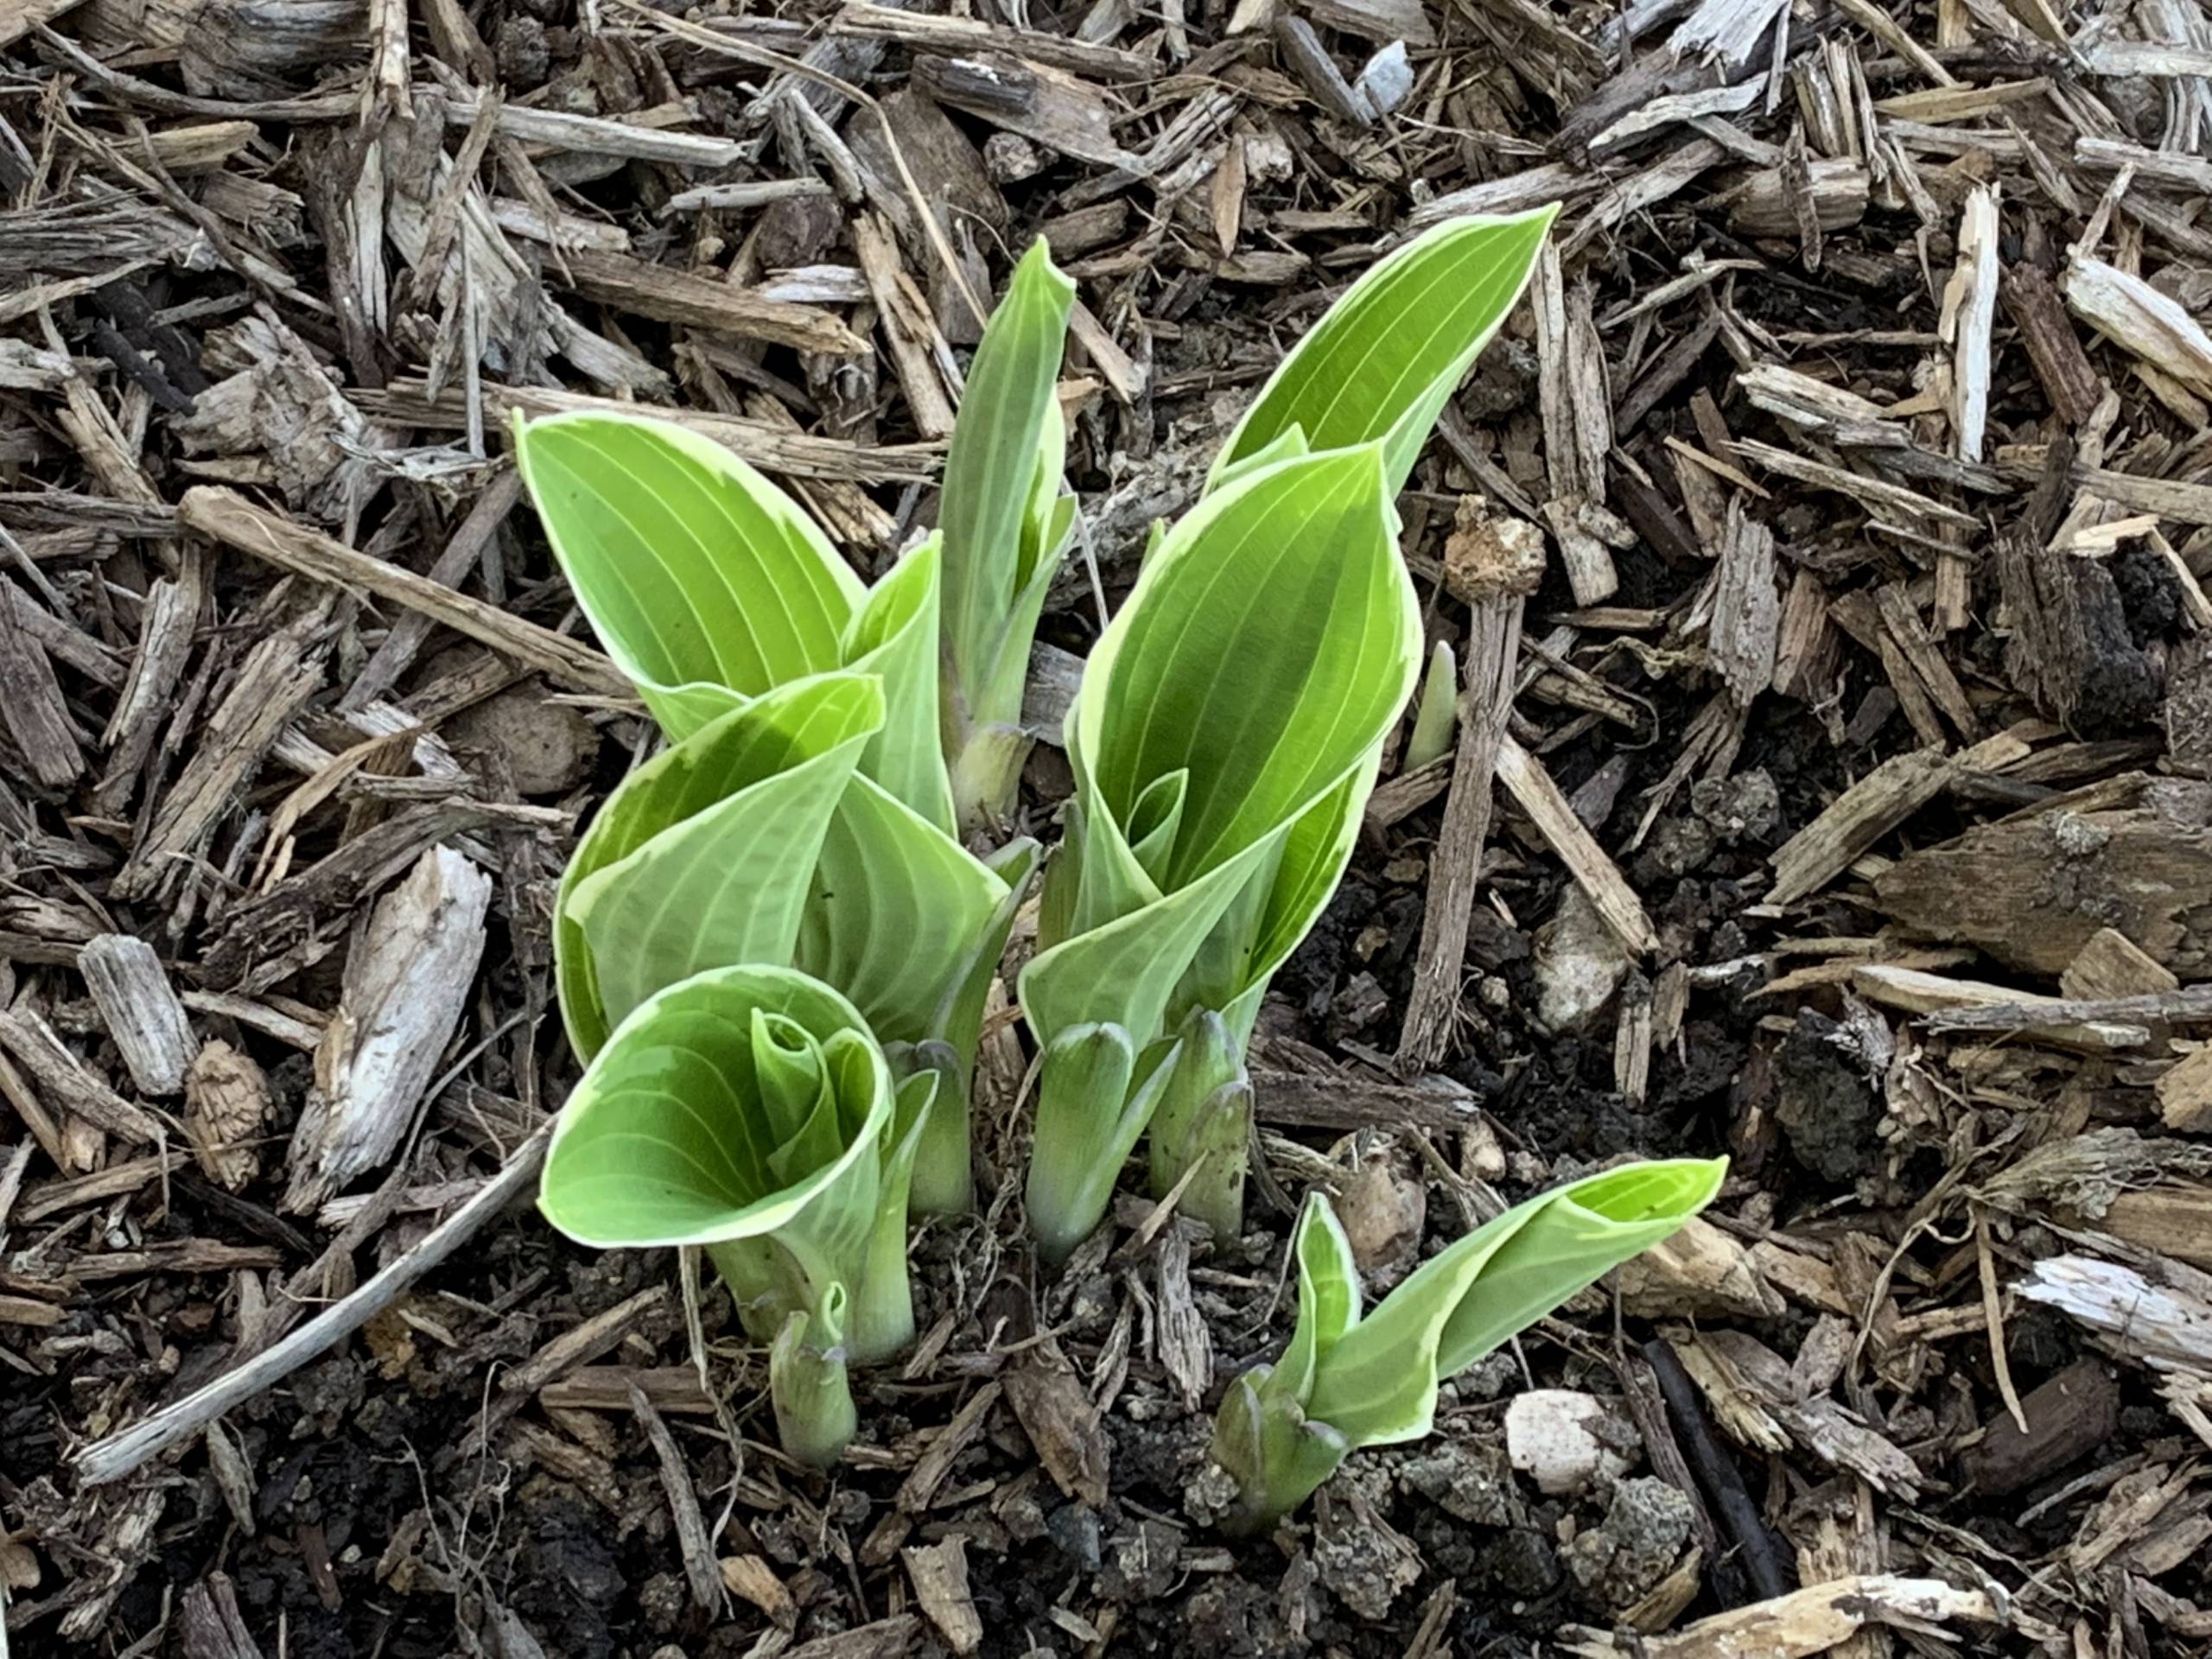 Green plant shoots are a picture of hope